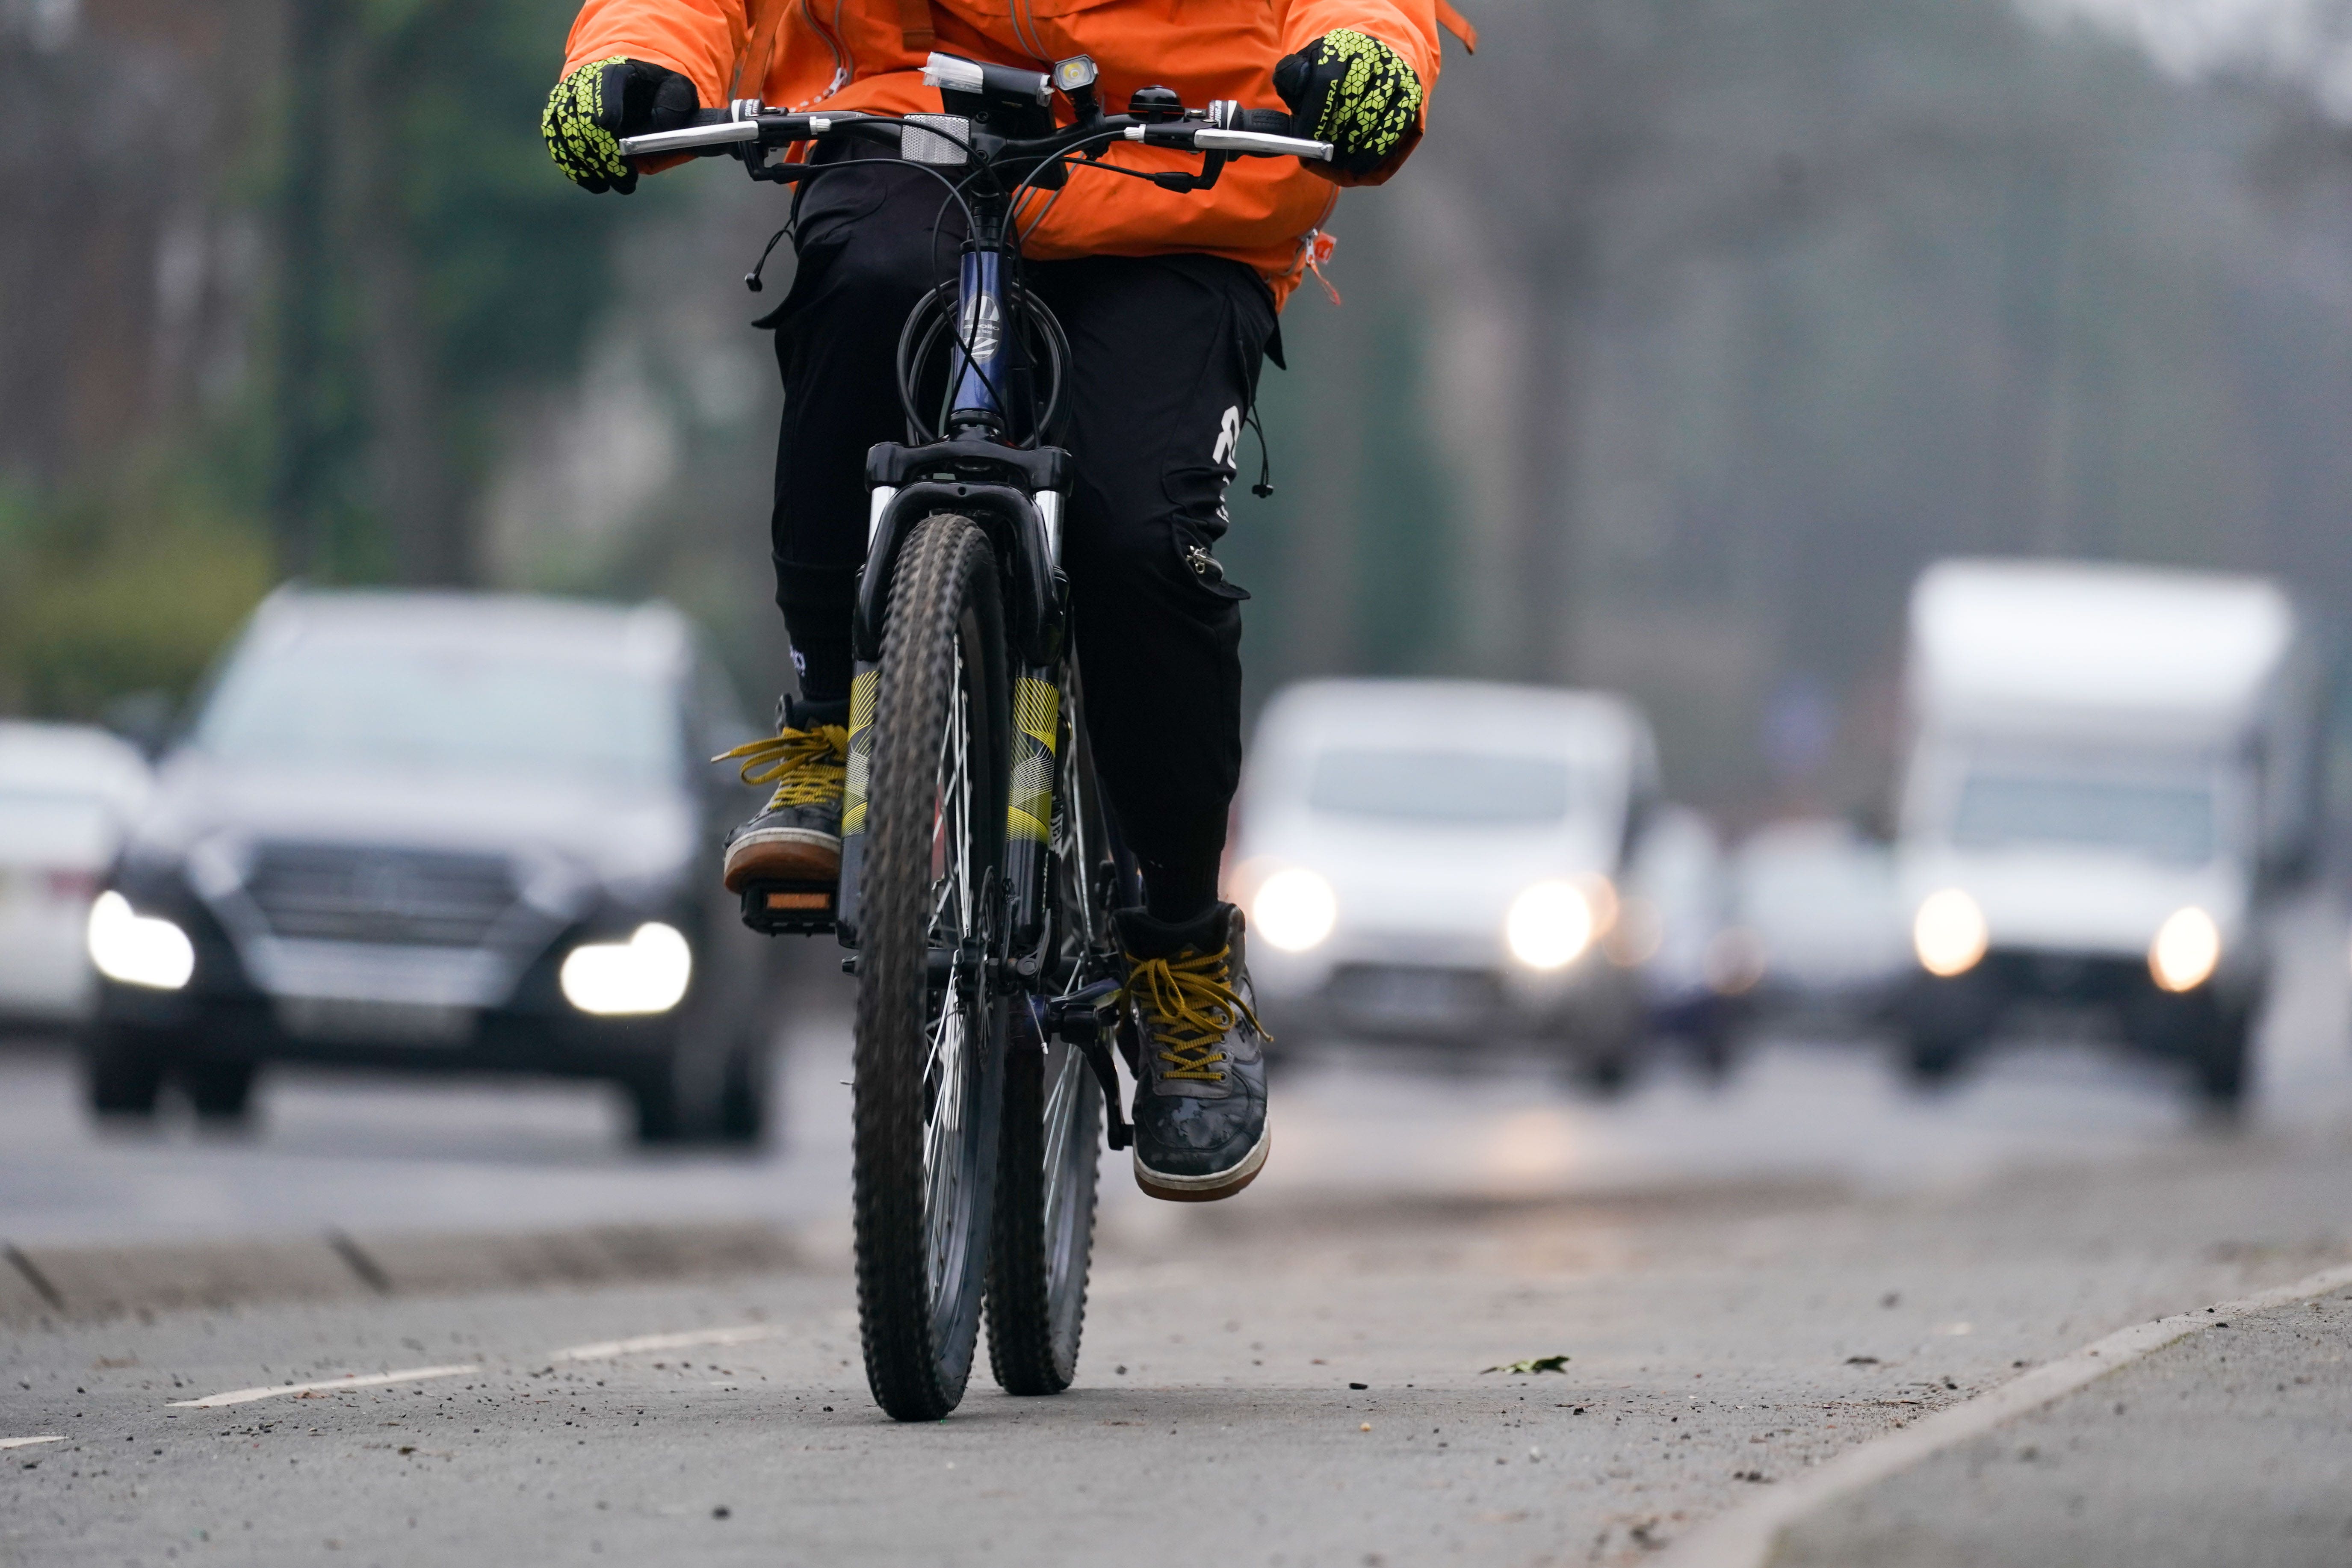 Most people (56%) in urban areas would support shifting investment from road building to fund active travel and public transport, a new survey suggests (Jacob King/PA)